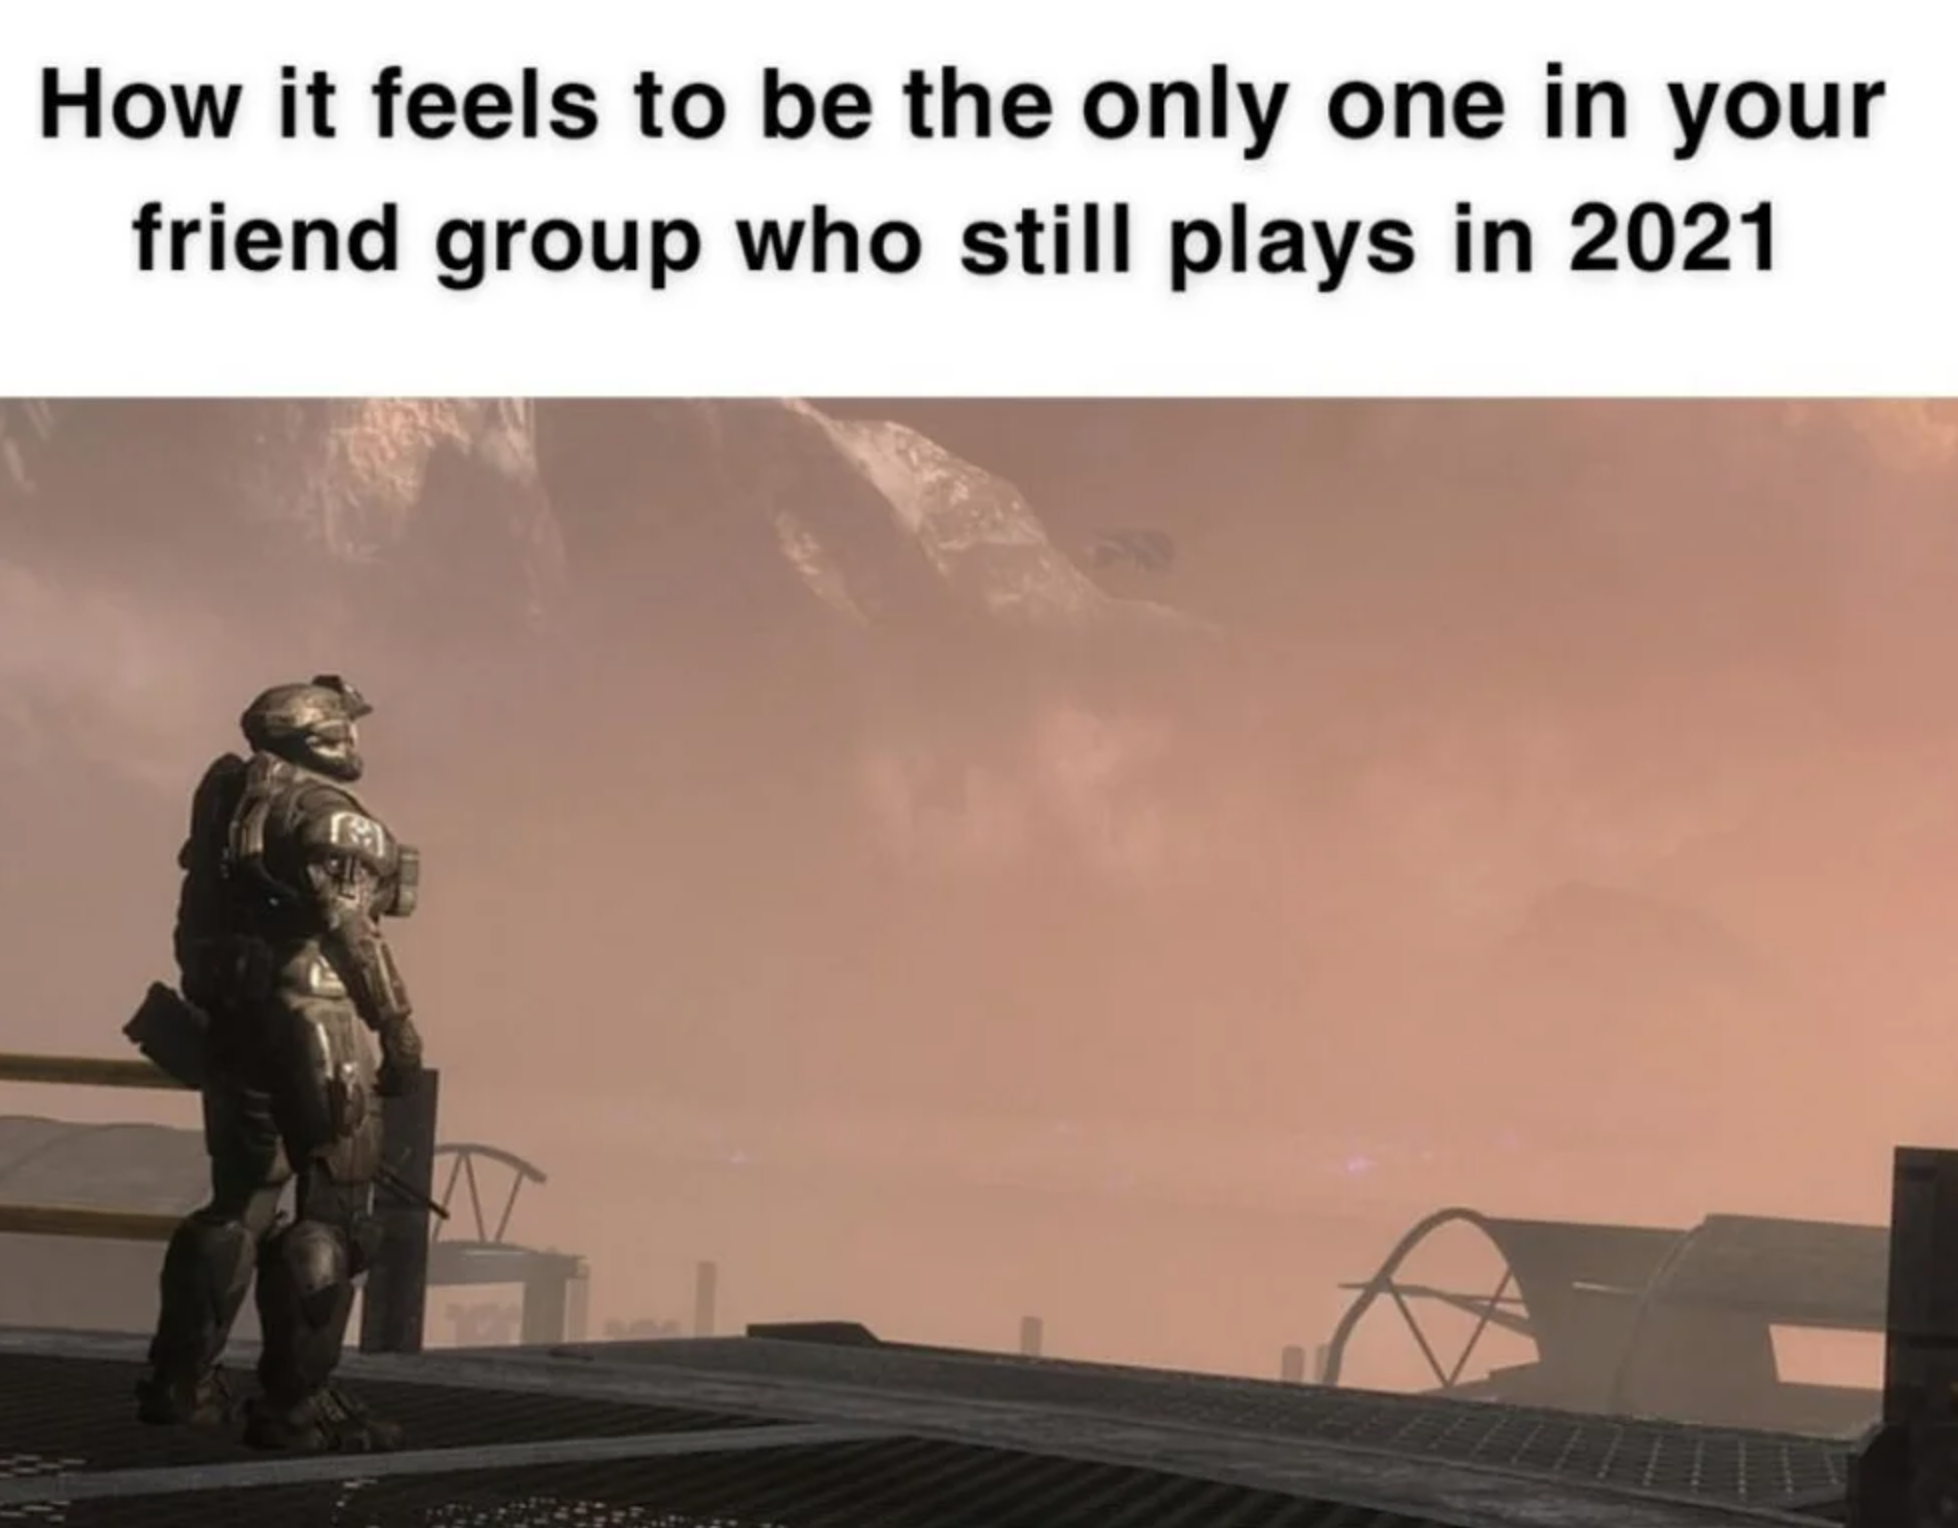 funny gaming memes - spartans never die they just go missing - How it feels to be the only one in your friend group who still plays in 2021